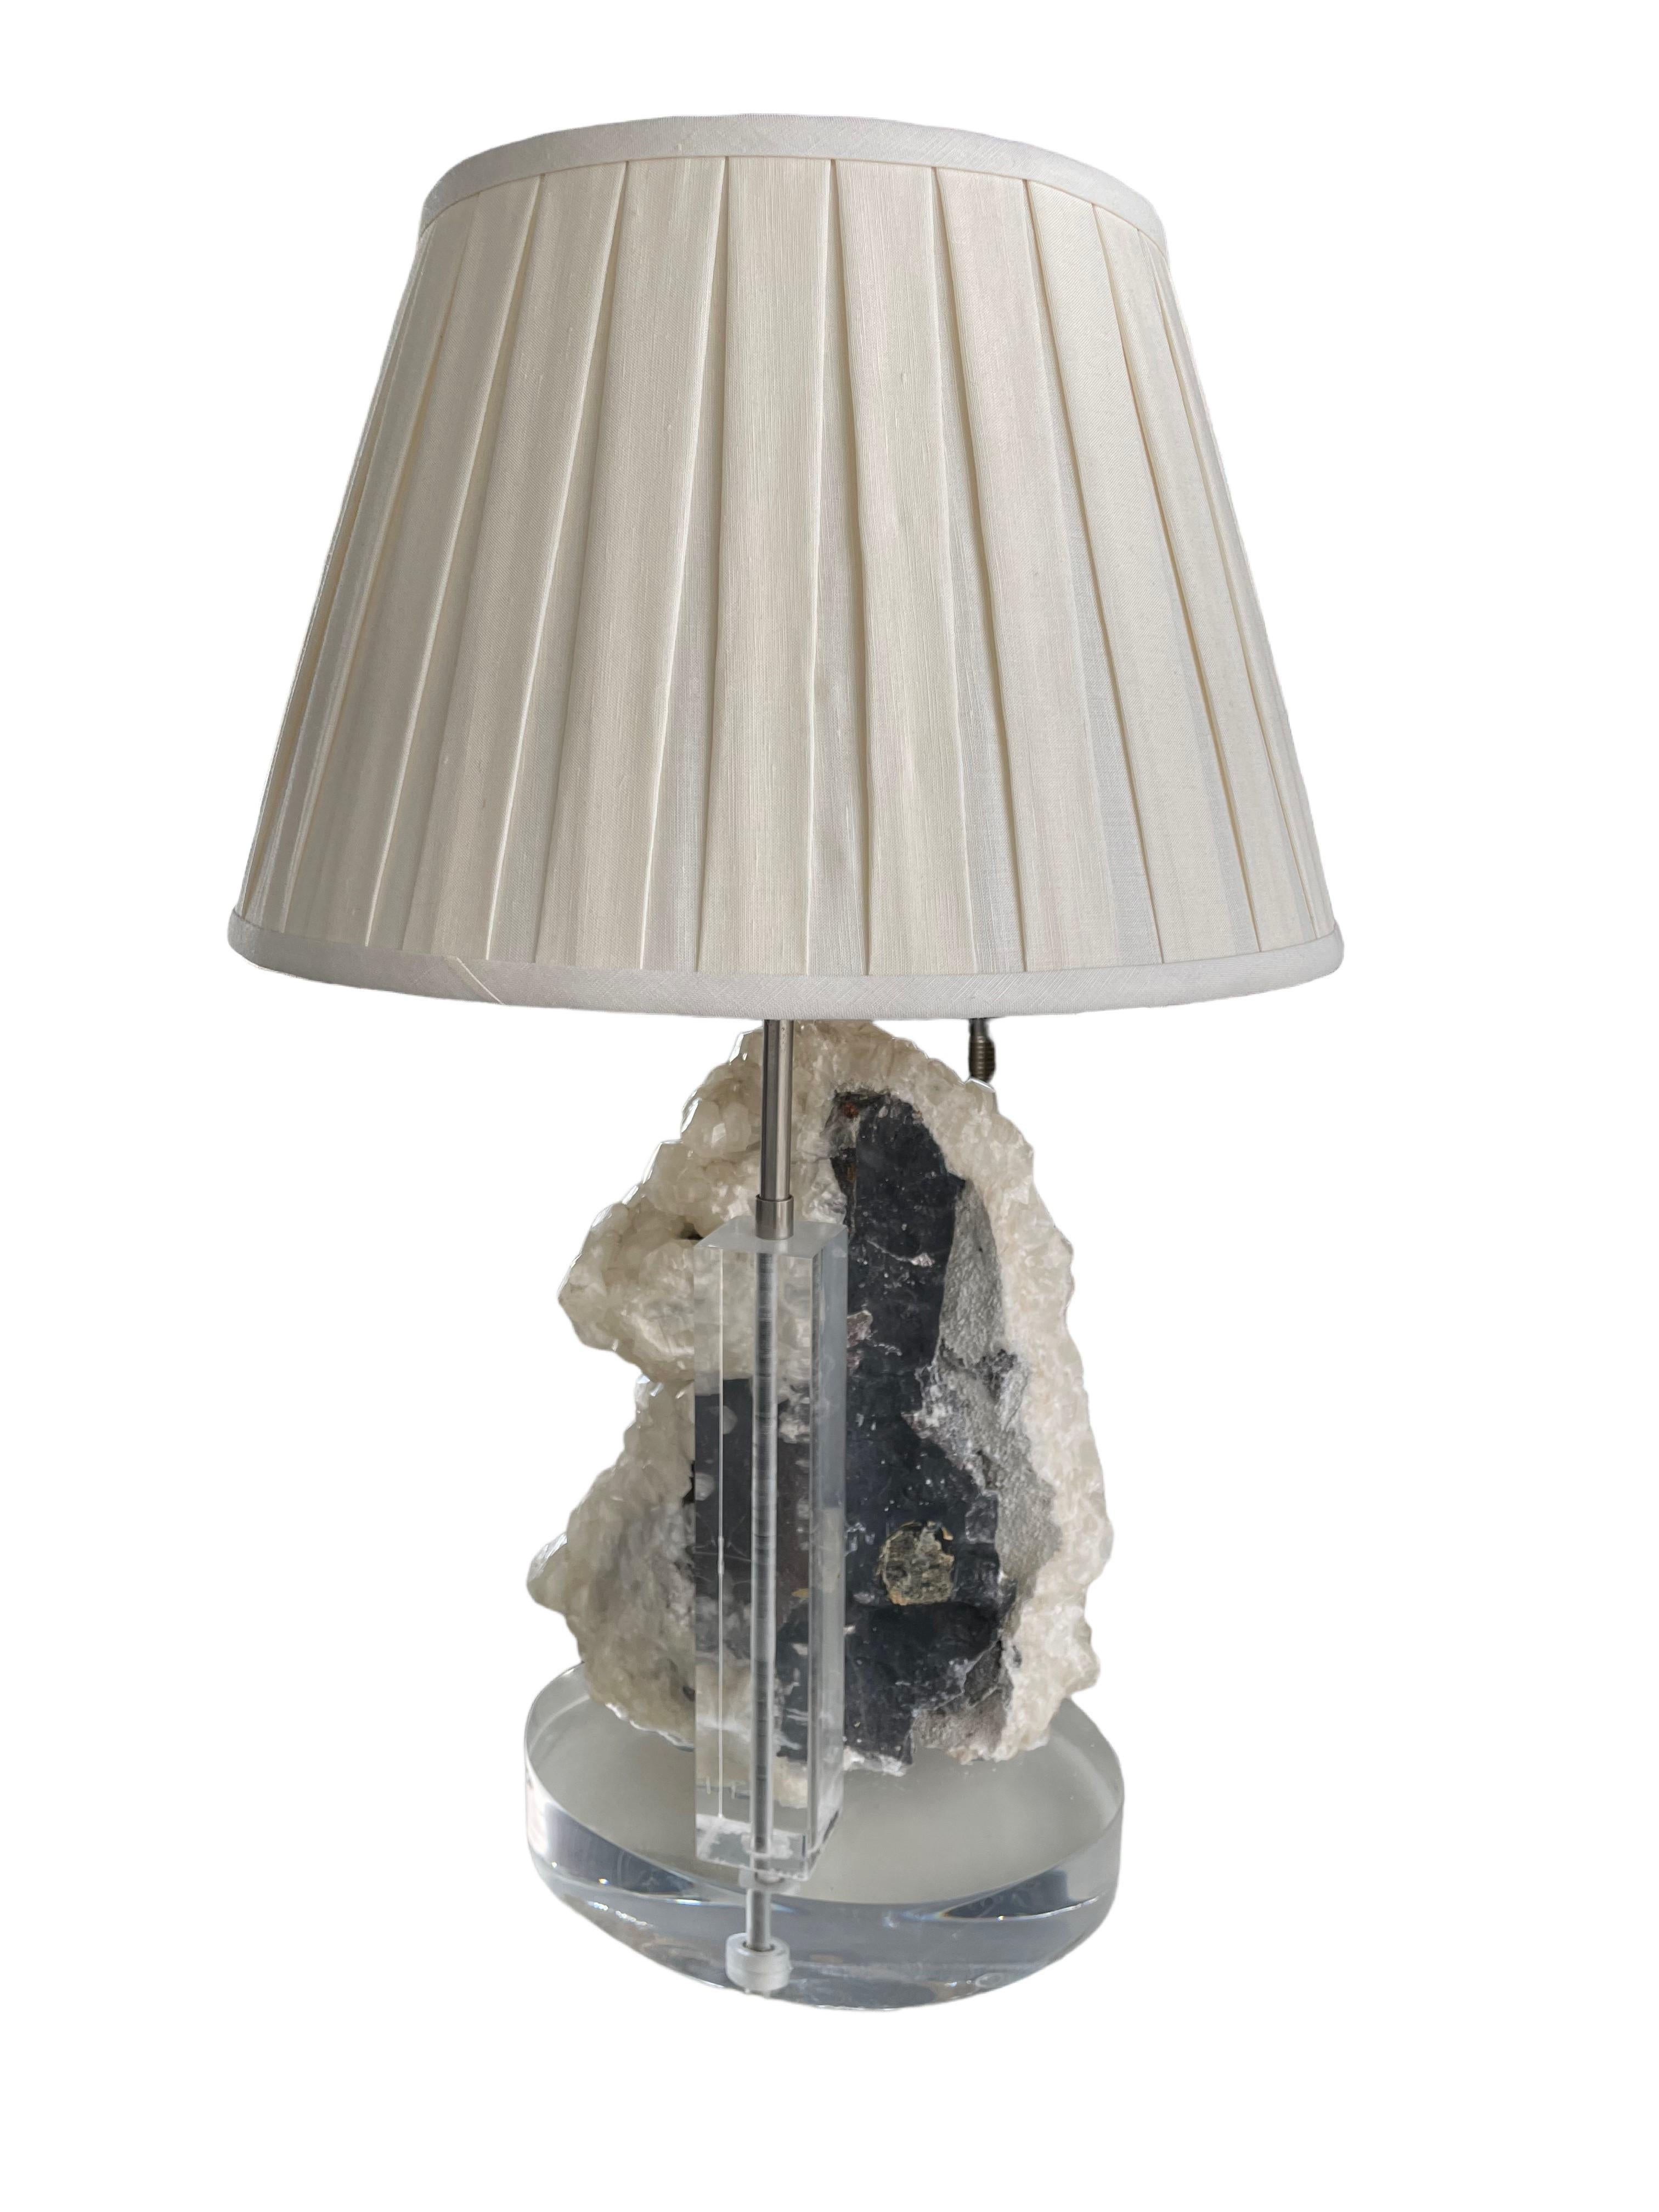 Quartz, as one of the hardest and strongest minerals on earth, makes a strong statement! This application, as a lamp, further highlights the lustrous combination of the crystals’ sparkle and matte composition. The Lucite base and finial paired with